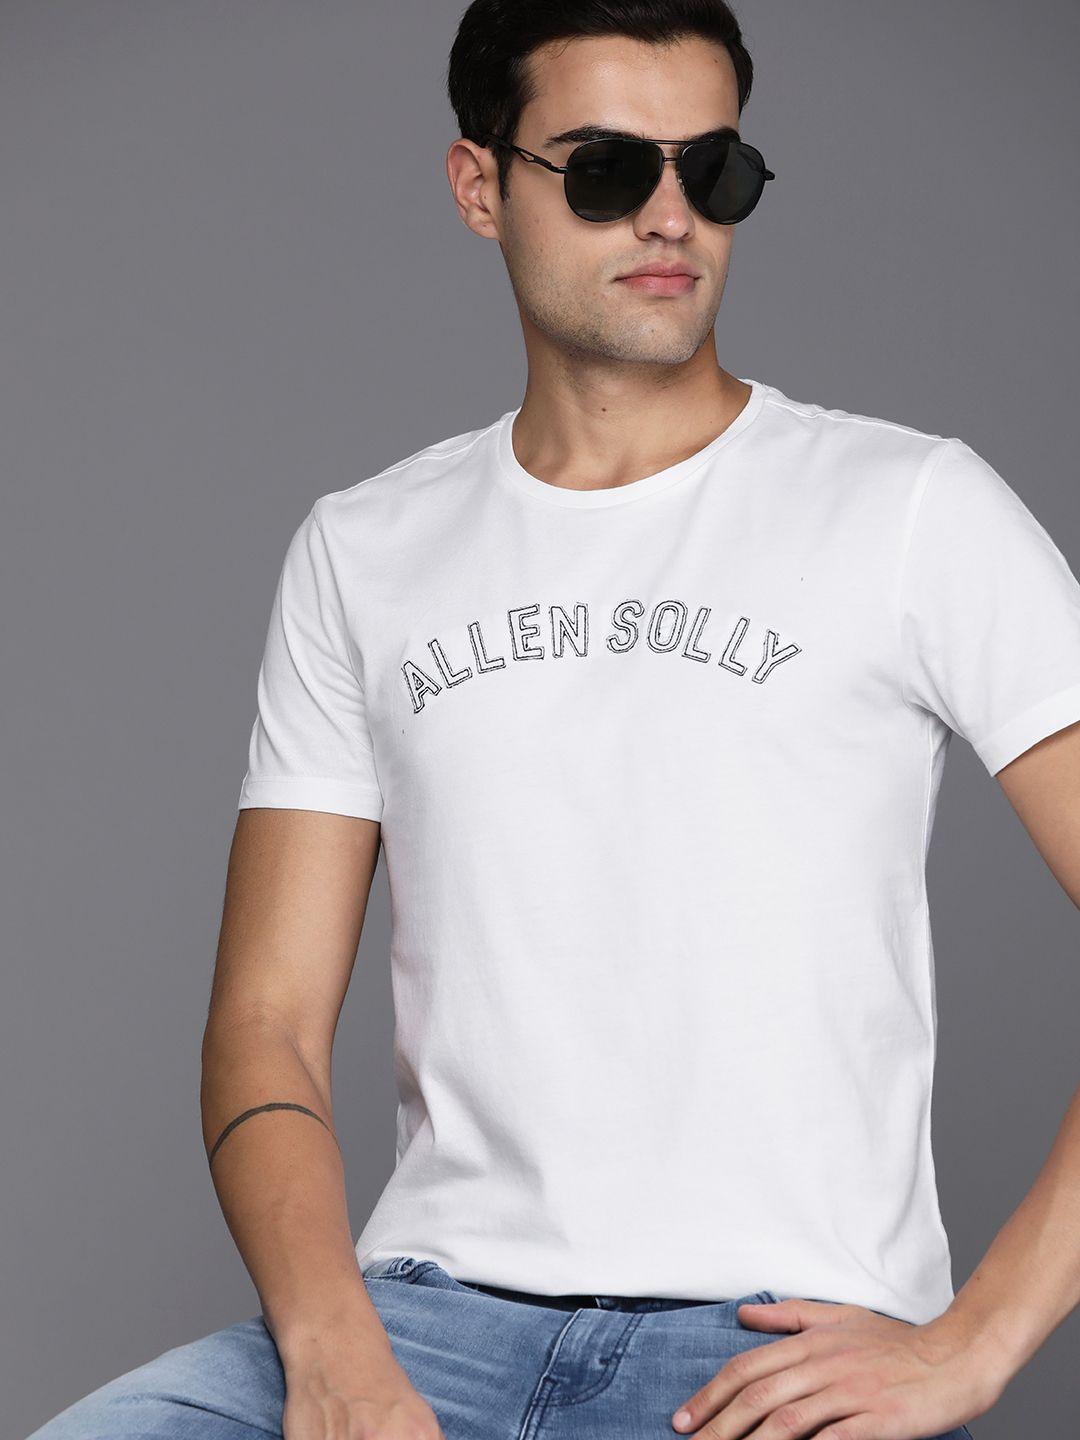 allen solly brand logo printed pure cotton t-shirt